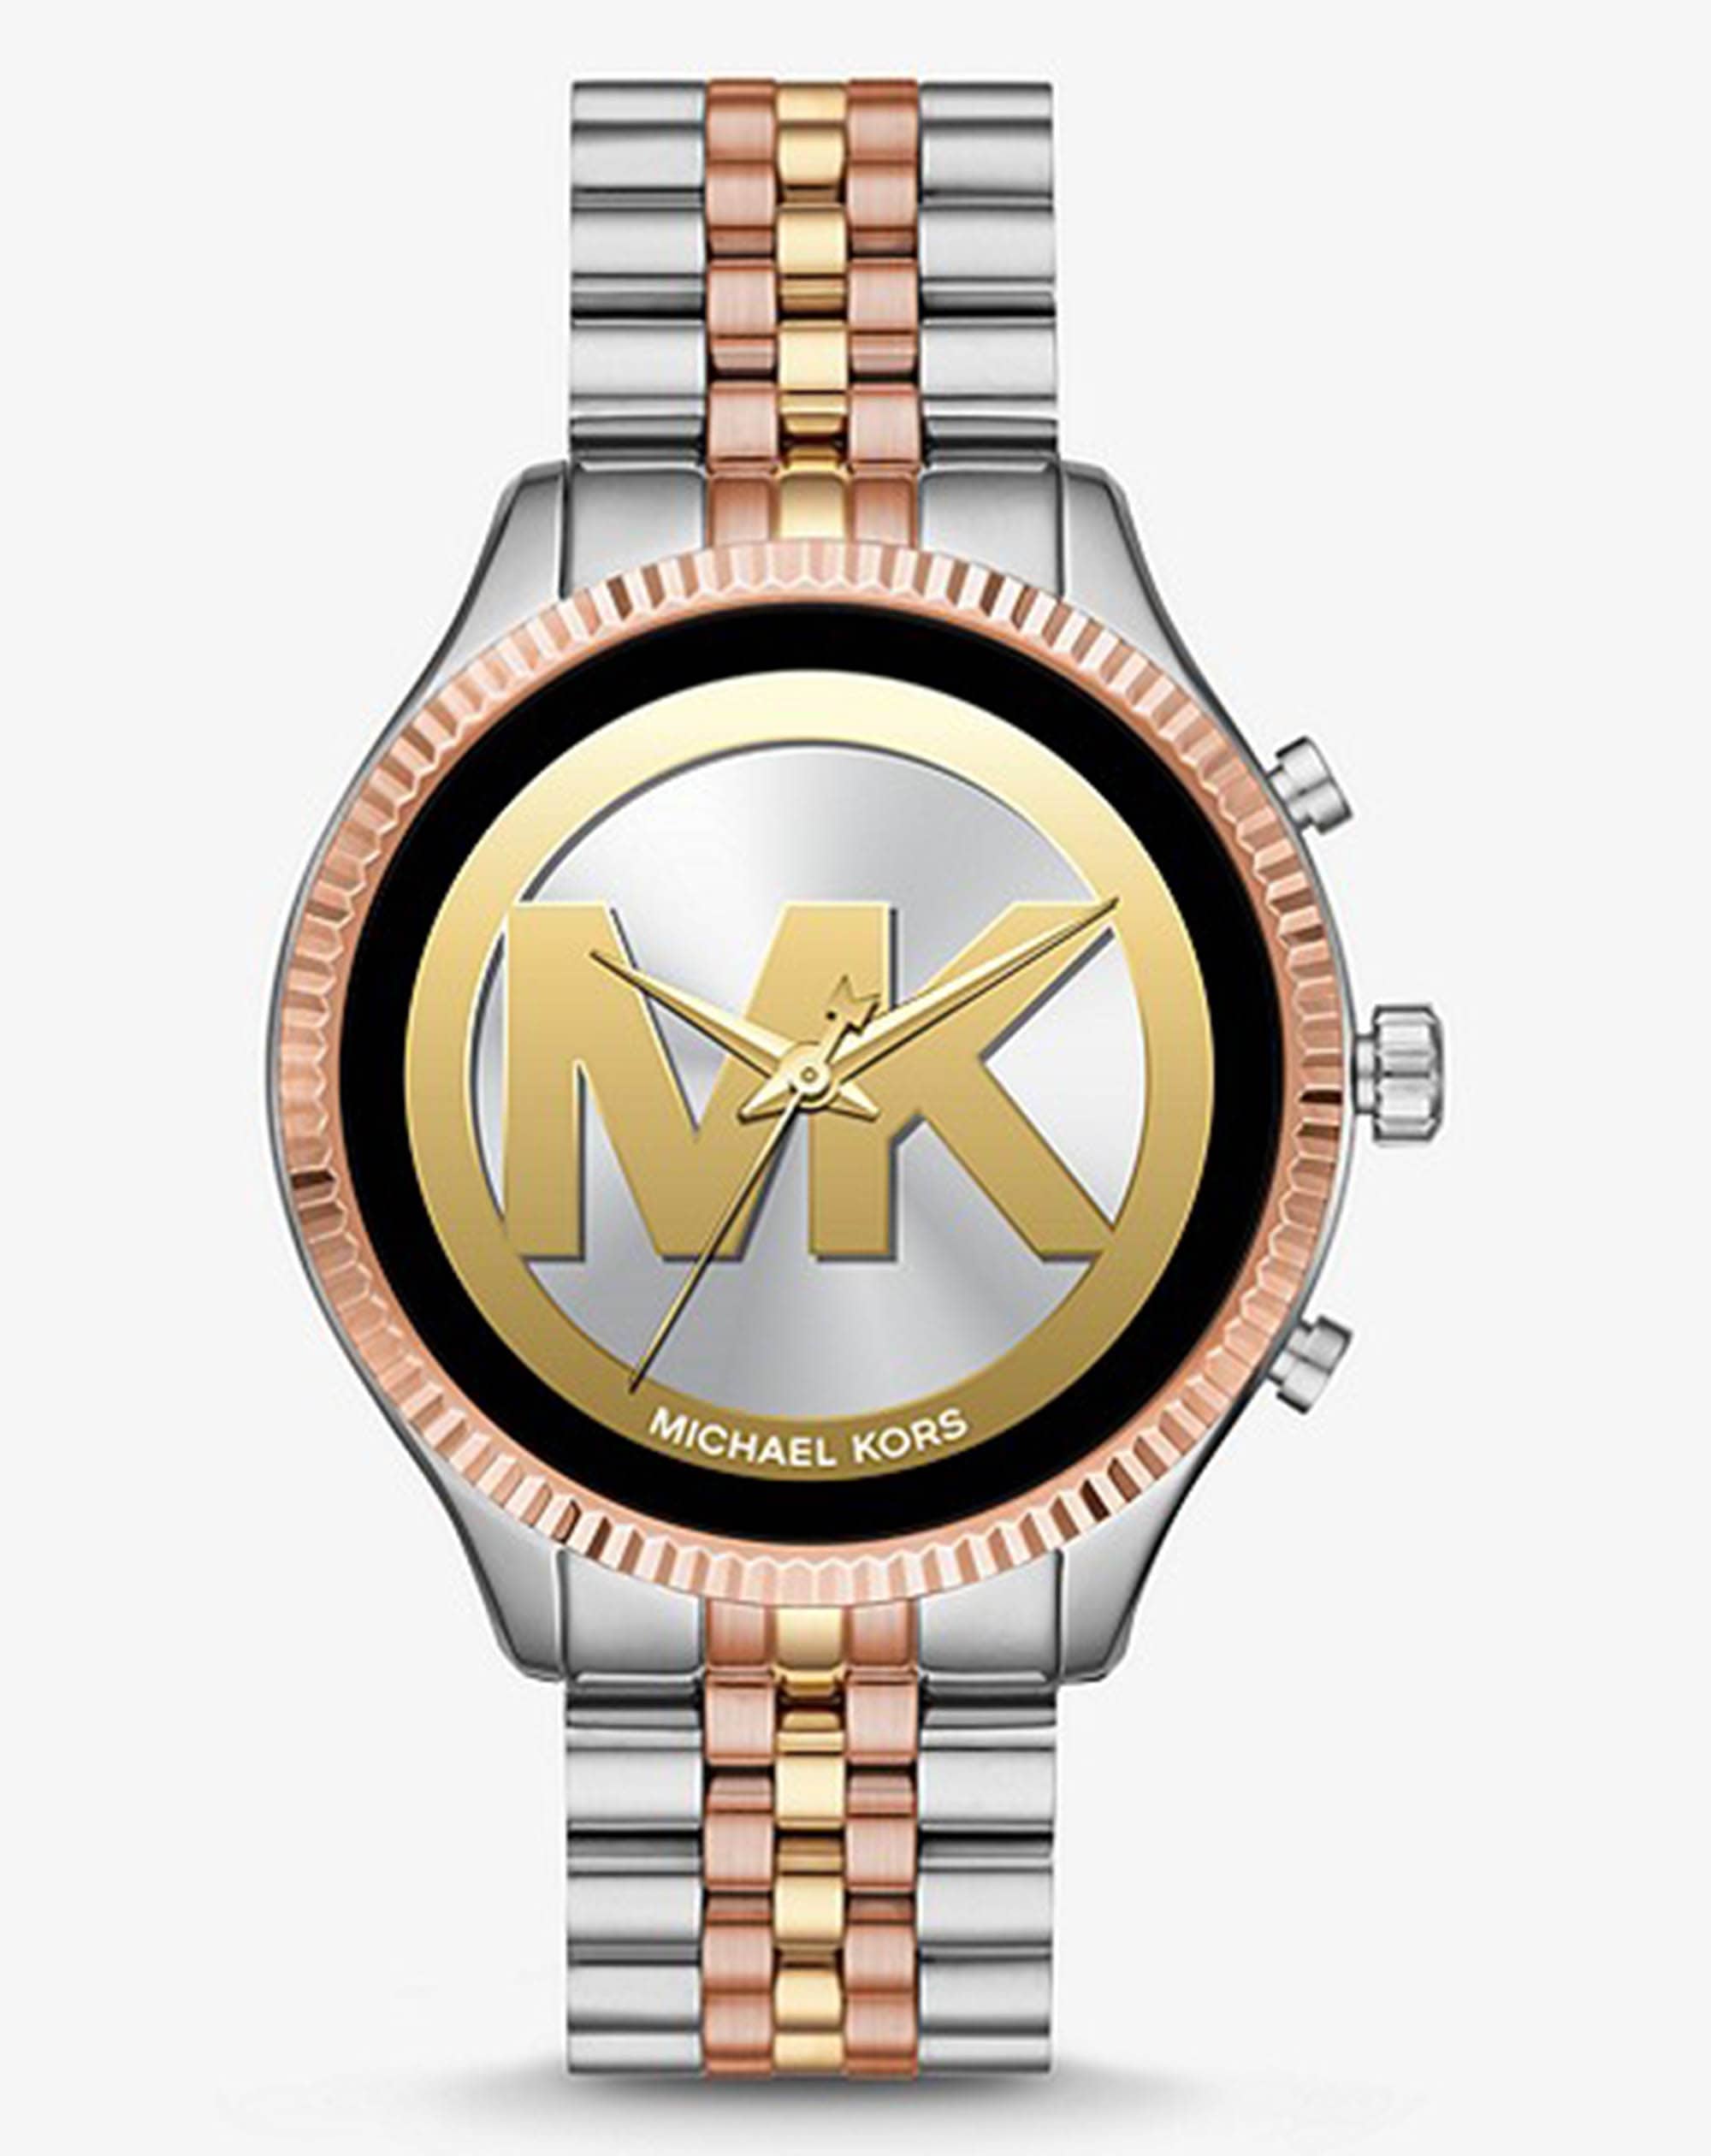 Michael Kors Access Bradshaw Gen 5 MKT5086  Rose Gold  Coolblue  Before  2359 delivered tomorrow